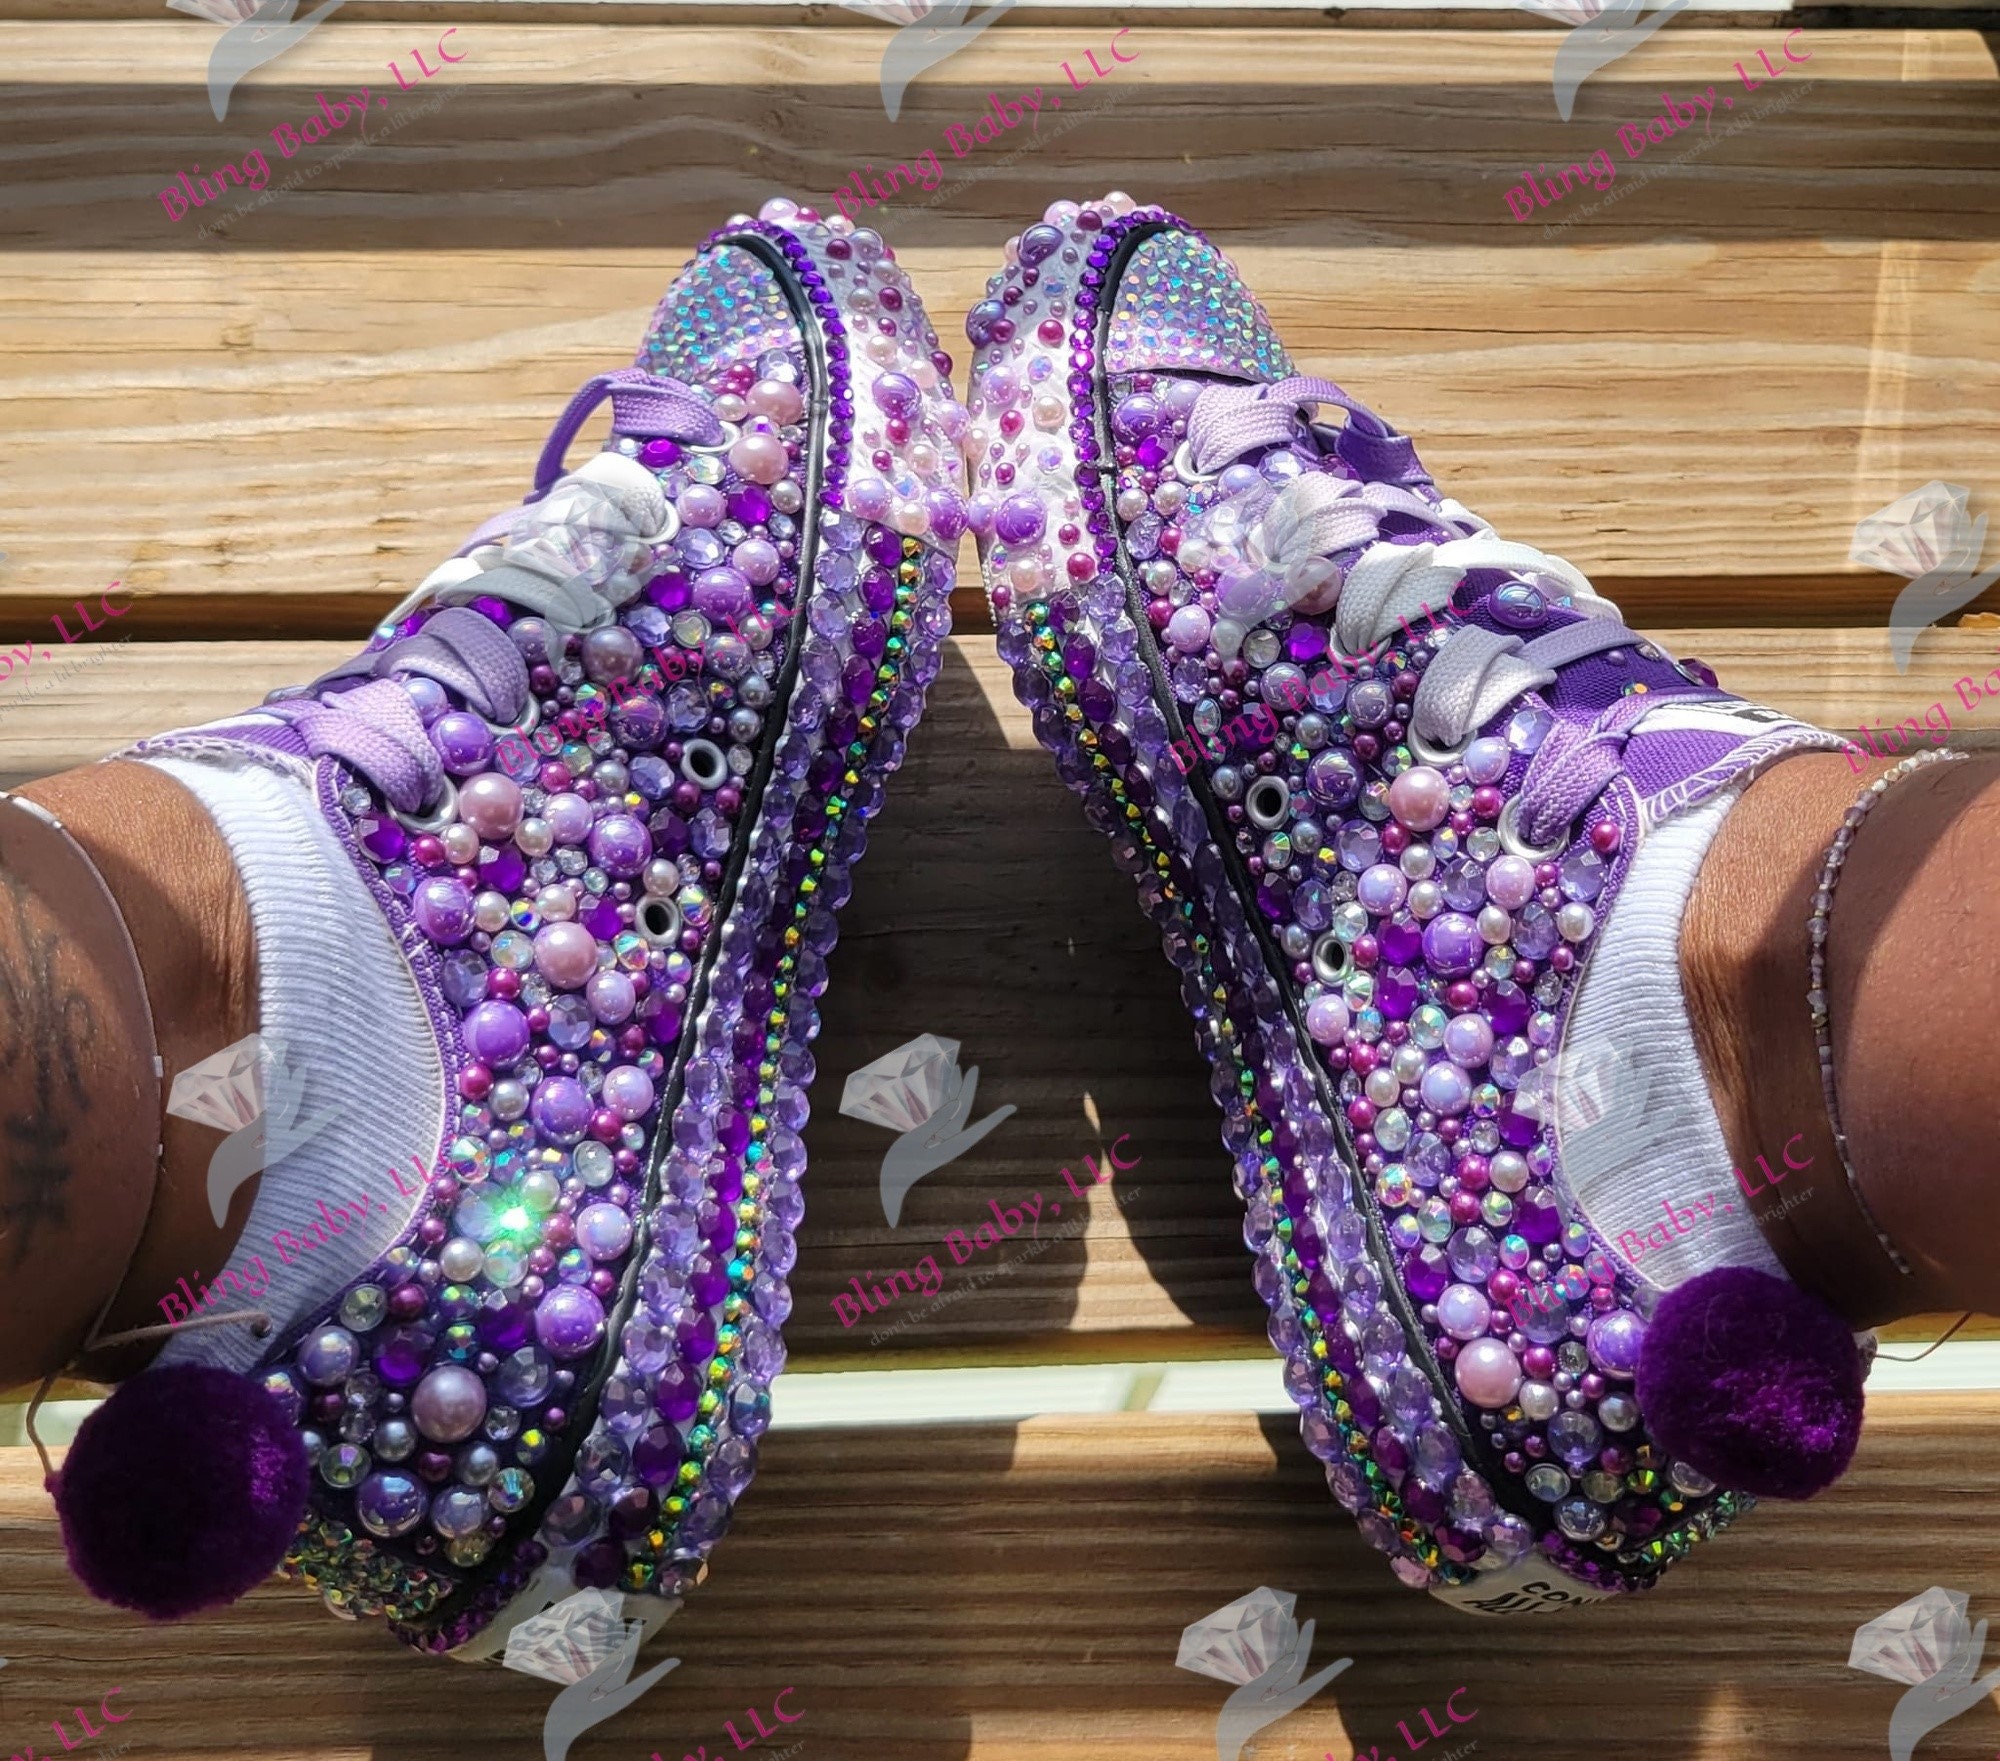 Purple and White Adult Tennis Shoes With Pearl's and Rhinestones